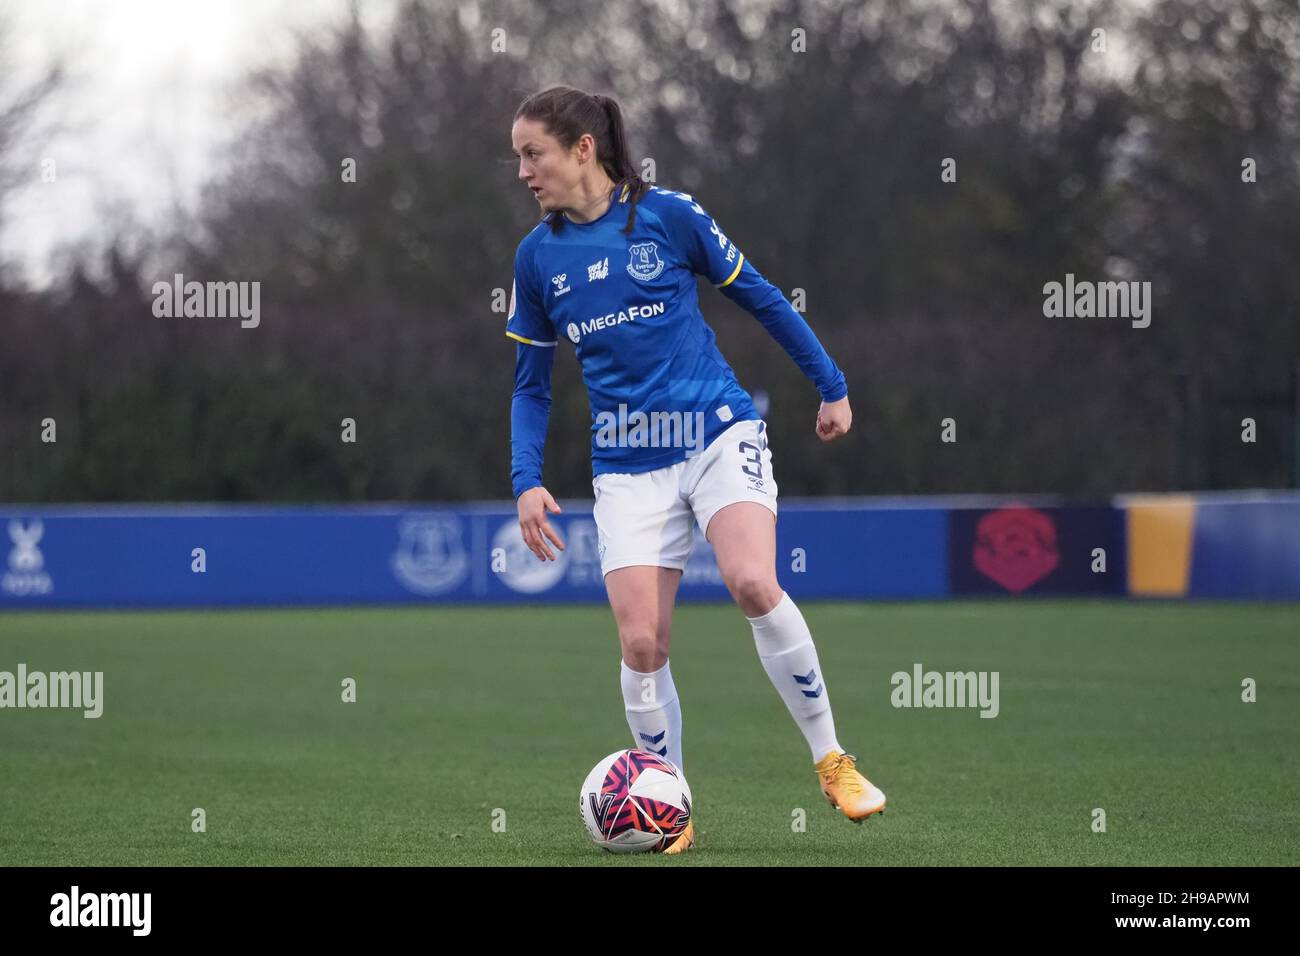 Liverpool, UK. 05th Dec, 2021. Liverpool, England, December 5th Danielle Turner (3 Everton) on the ball during the FA Womens Continental League Cup game between Everton and Durham at Walton Hall Park in Liverpool, England Natalie Mincher/SPP Credit: SPP Sport Press Photo. /Alamy Live News Stock Photo